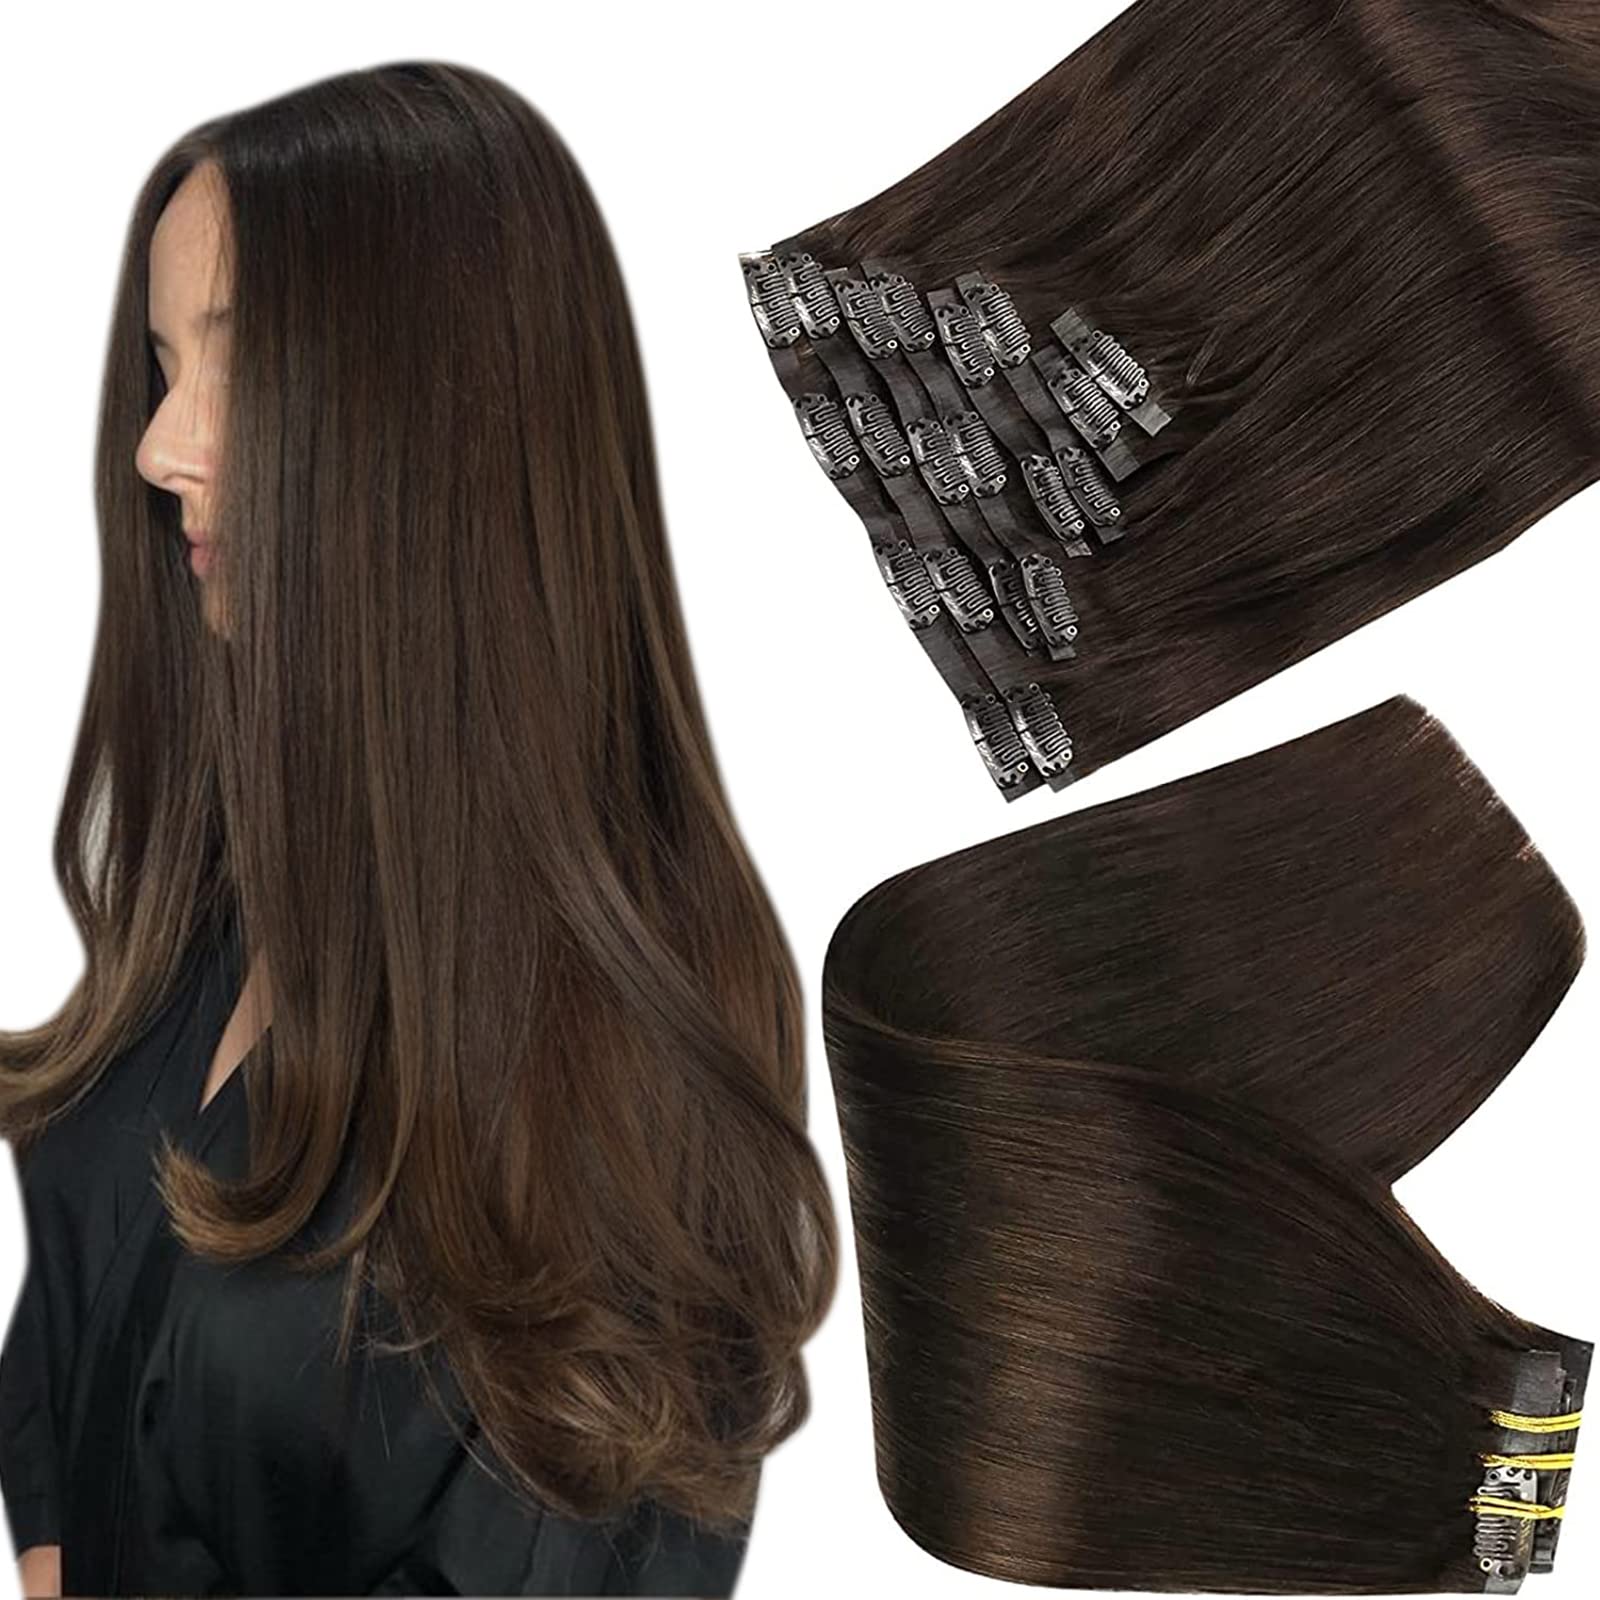 weft-human-hair-extensions-the-worlds-top-selling-hair-extension-now-in-every-wholesale-market-2